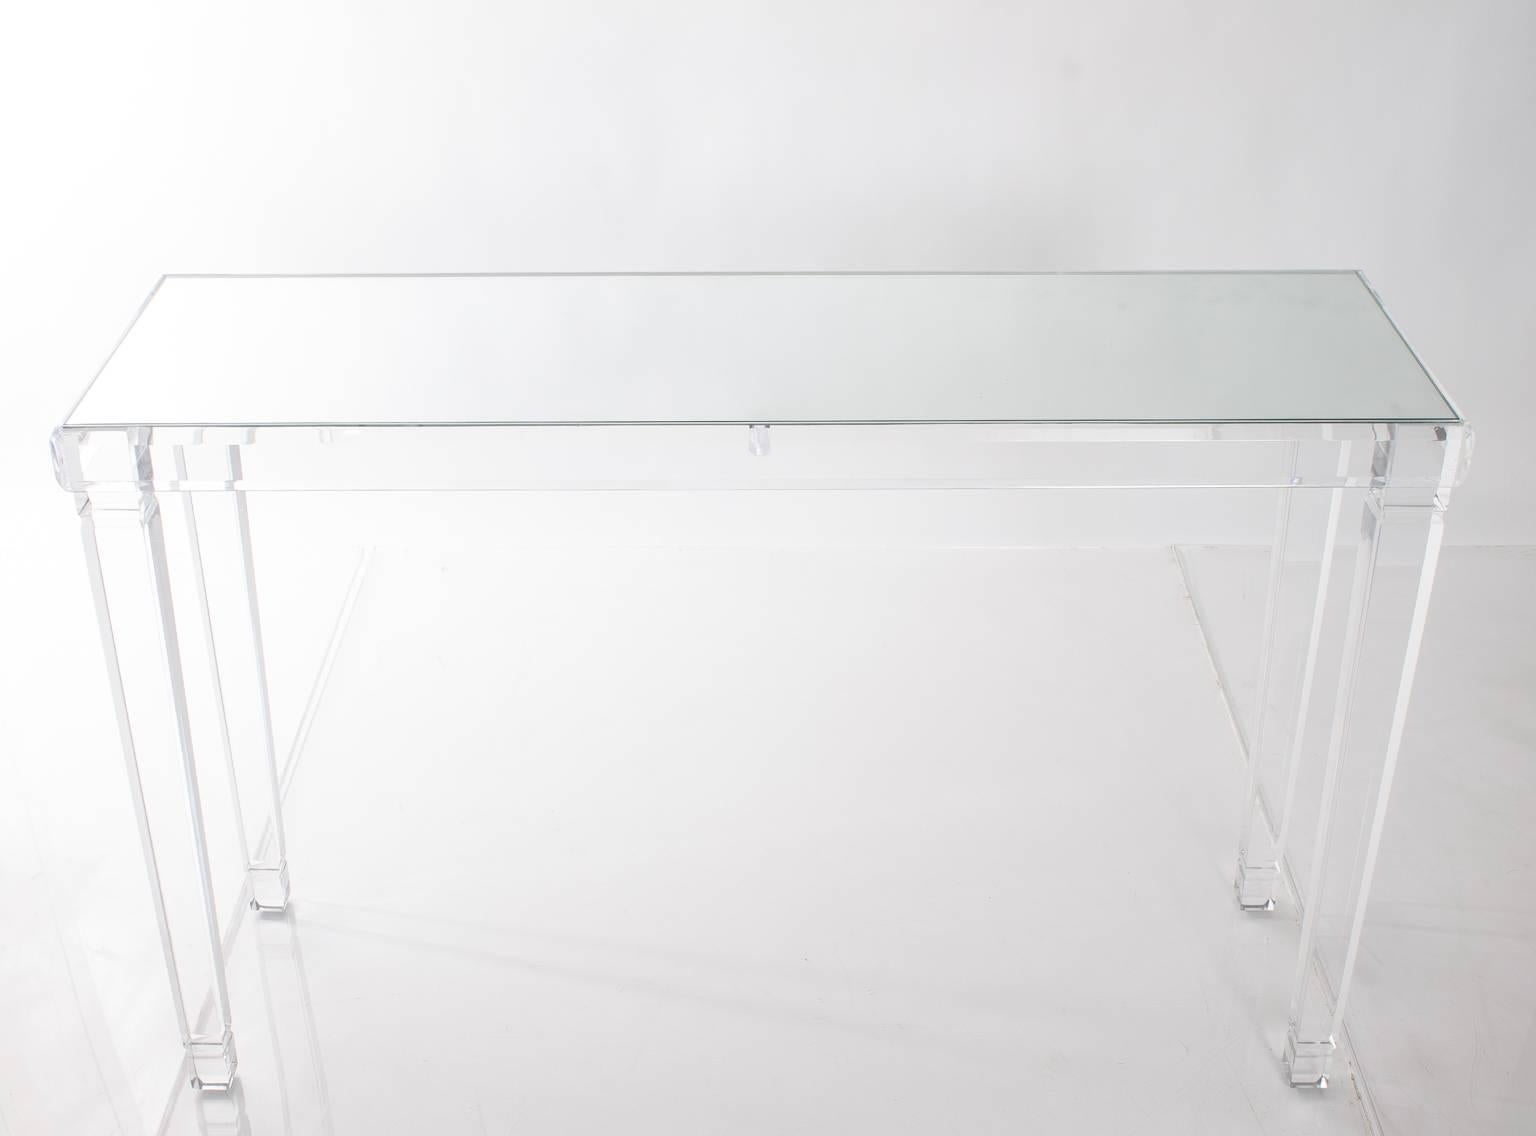 Custom Lucite table with mirrored top and elegant tapered legs. Perfect for an entryway or as a sofa table.